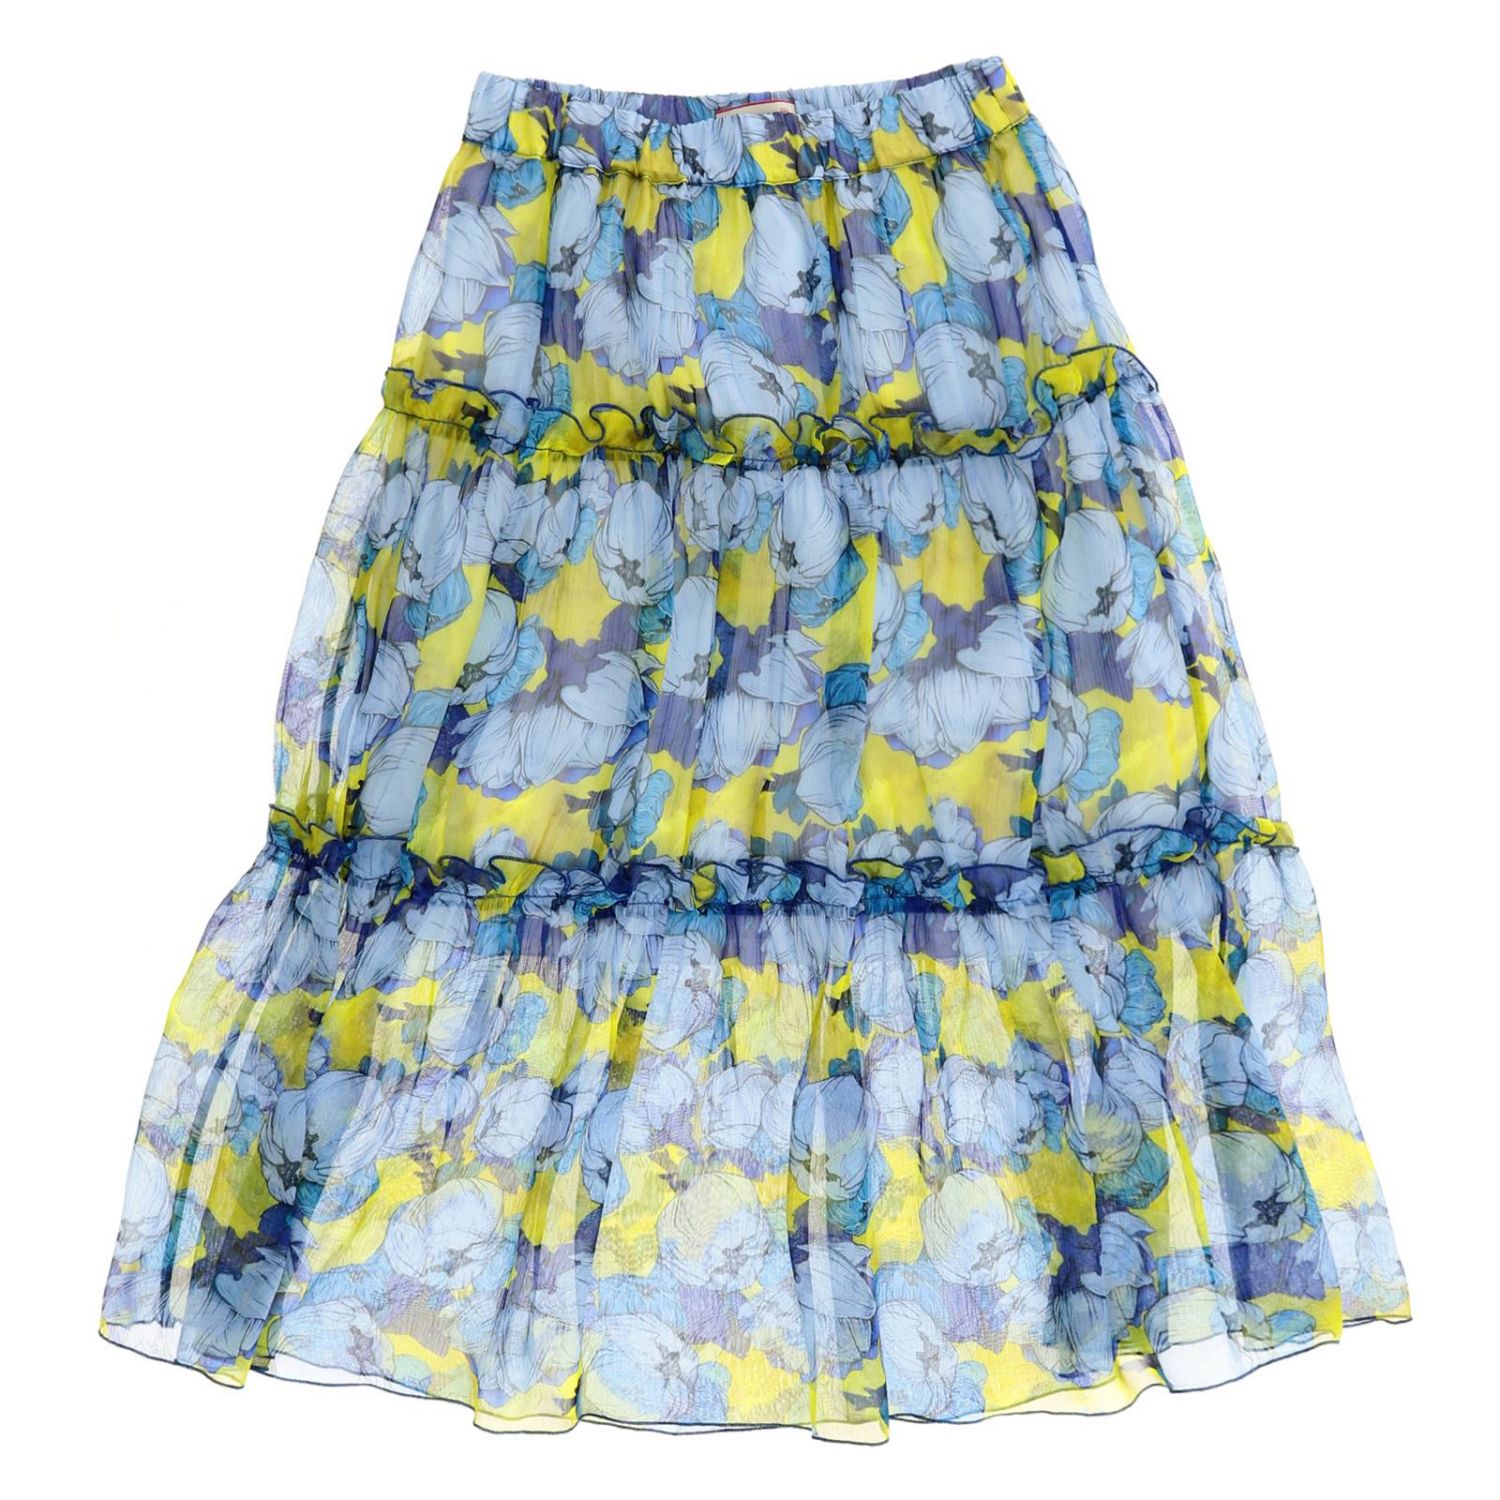 Pinko Outlet: Skirt kids - Gnawed Blue | Skirt Pinko 1A119M-Y594 MANNU ...